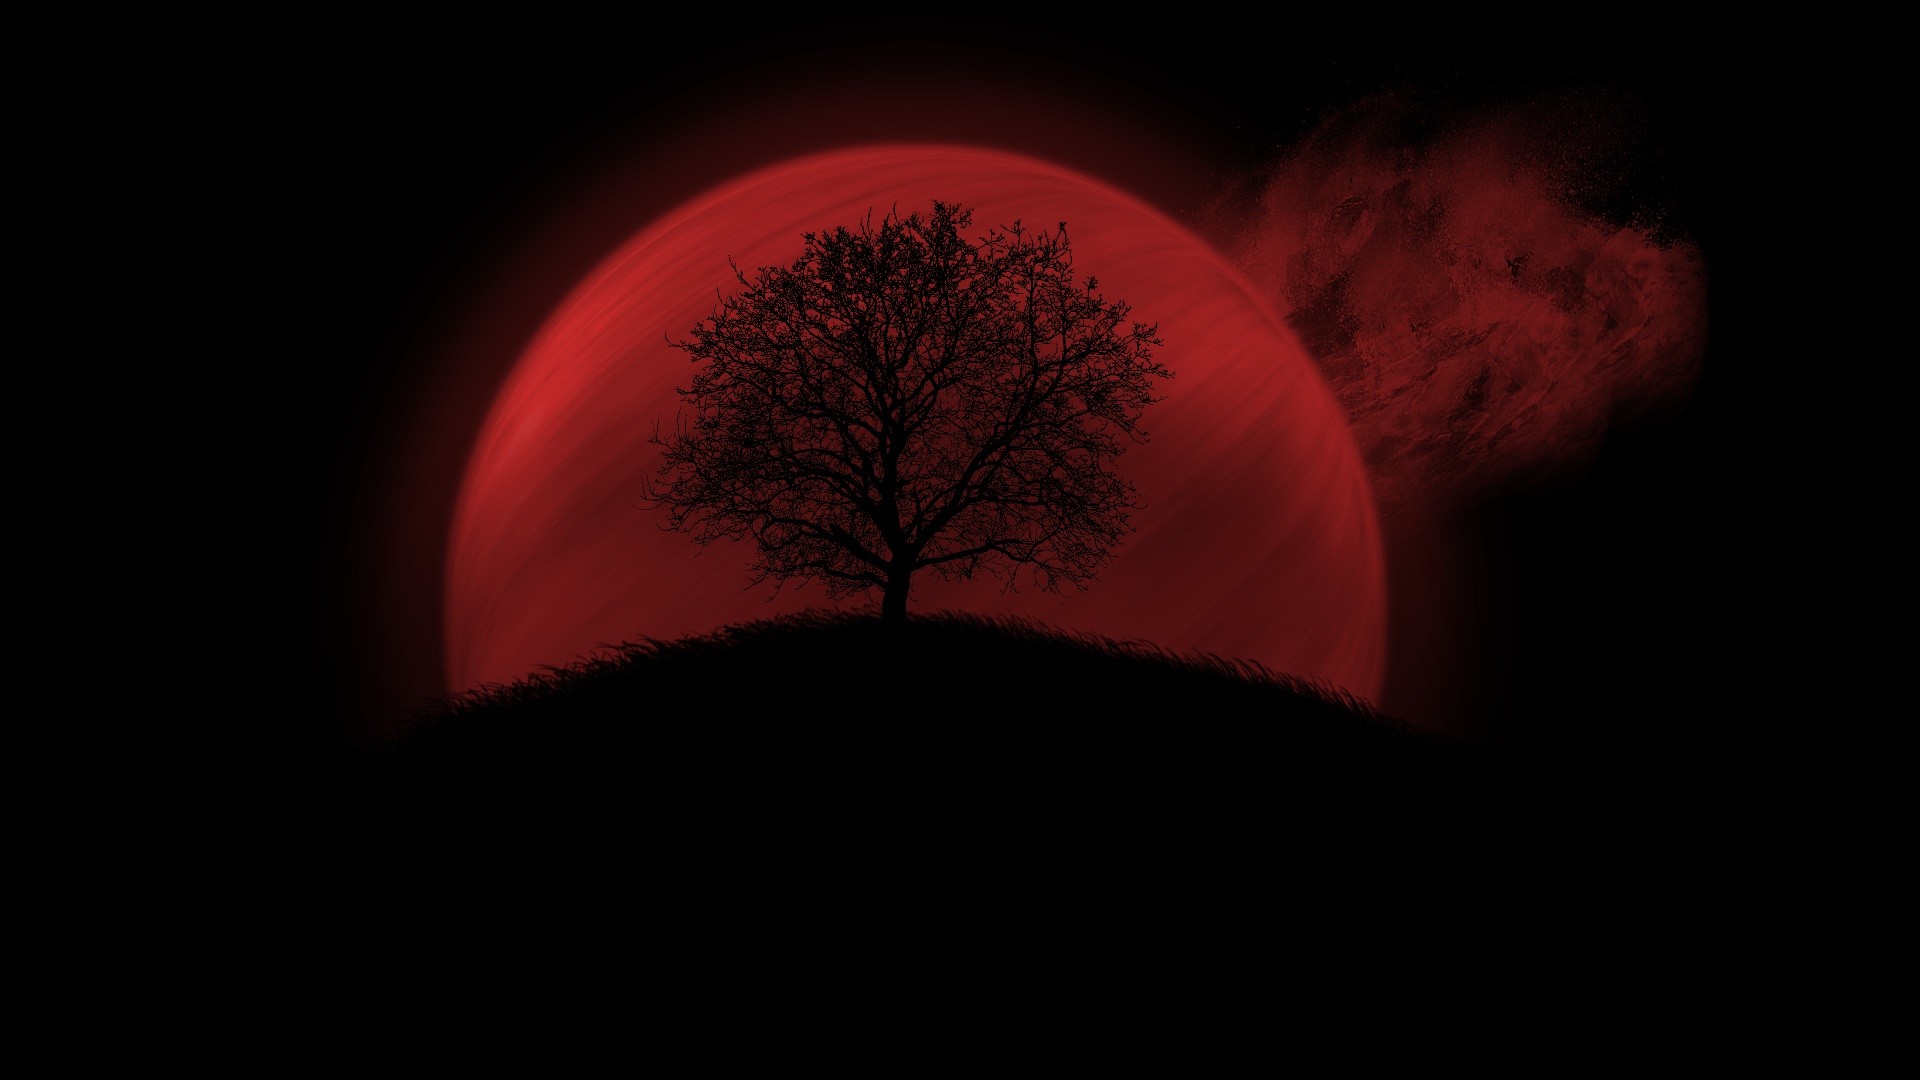 Blue And Red Moon Wallpaper Photos Free Hd 4k Background Wallpaperss